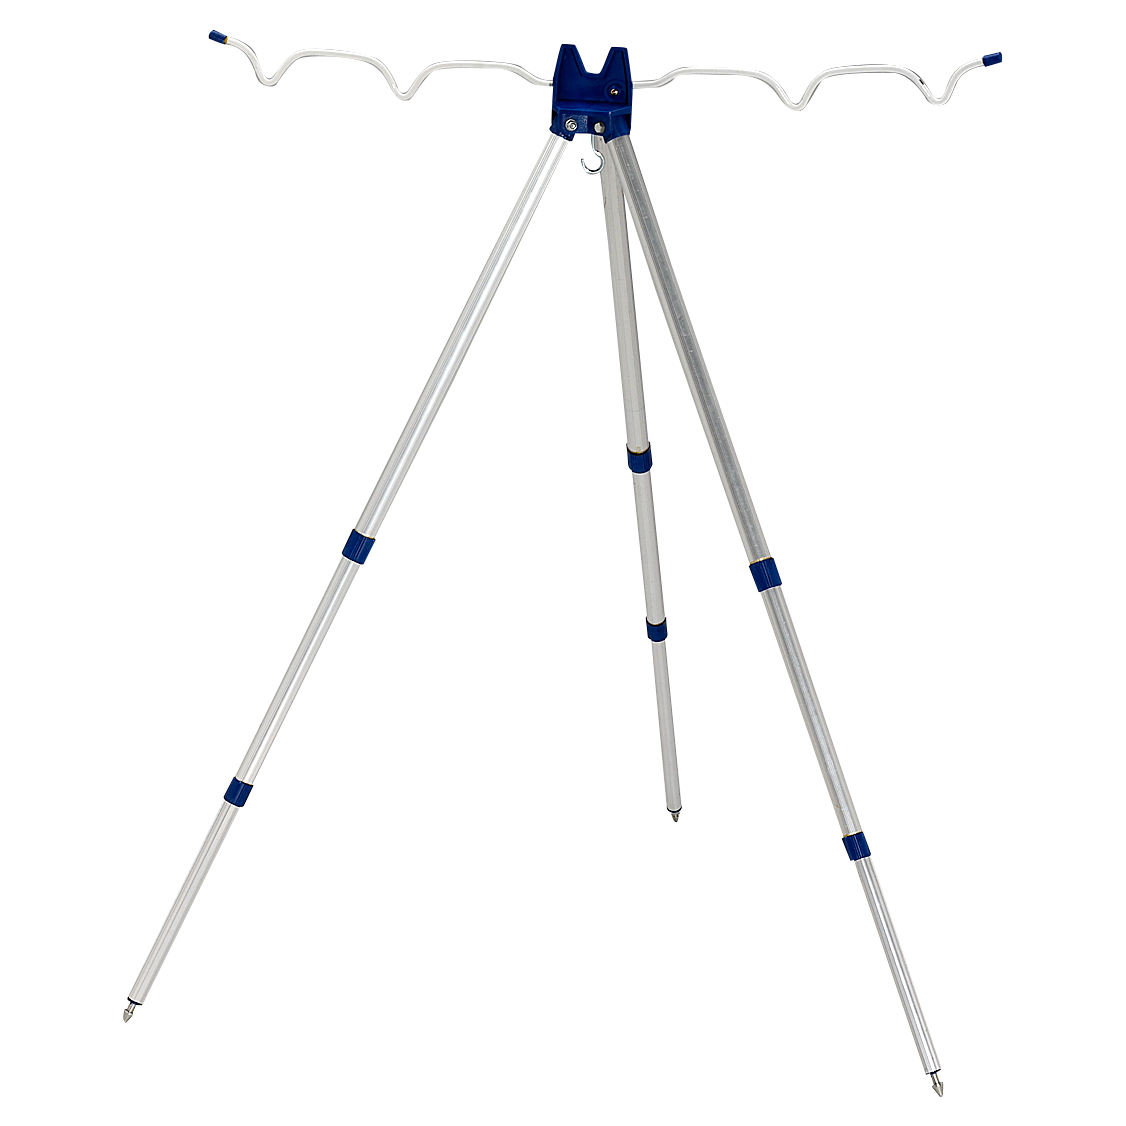 Salmo 3-leg rod stand at low prices